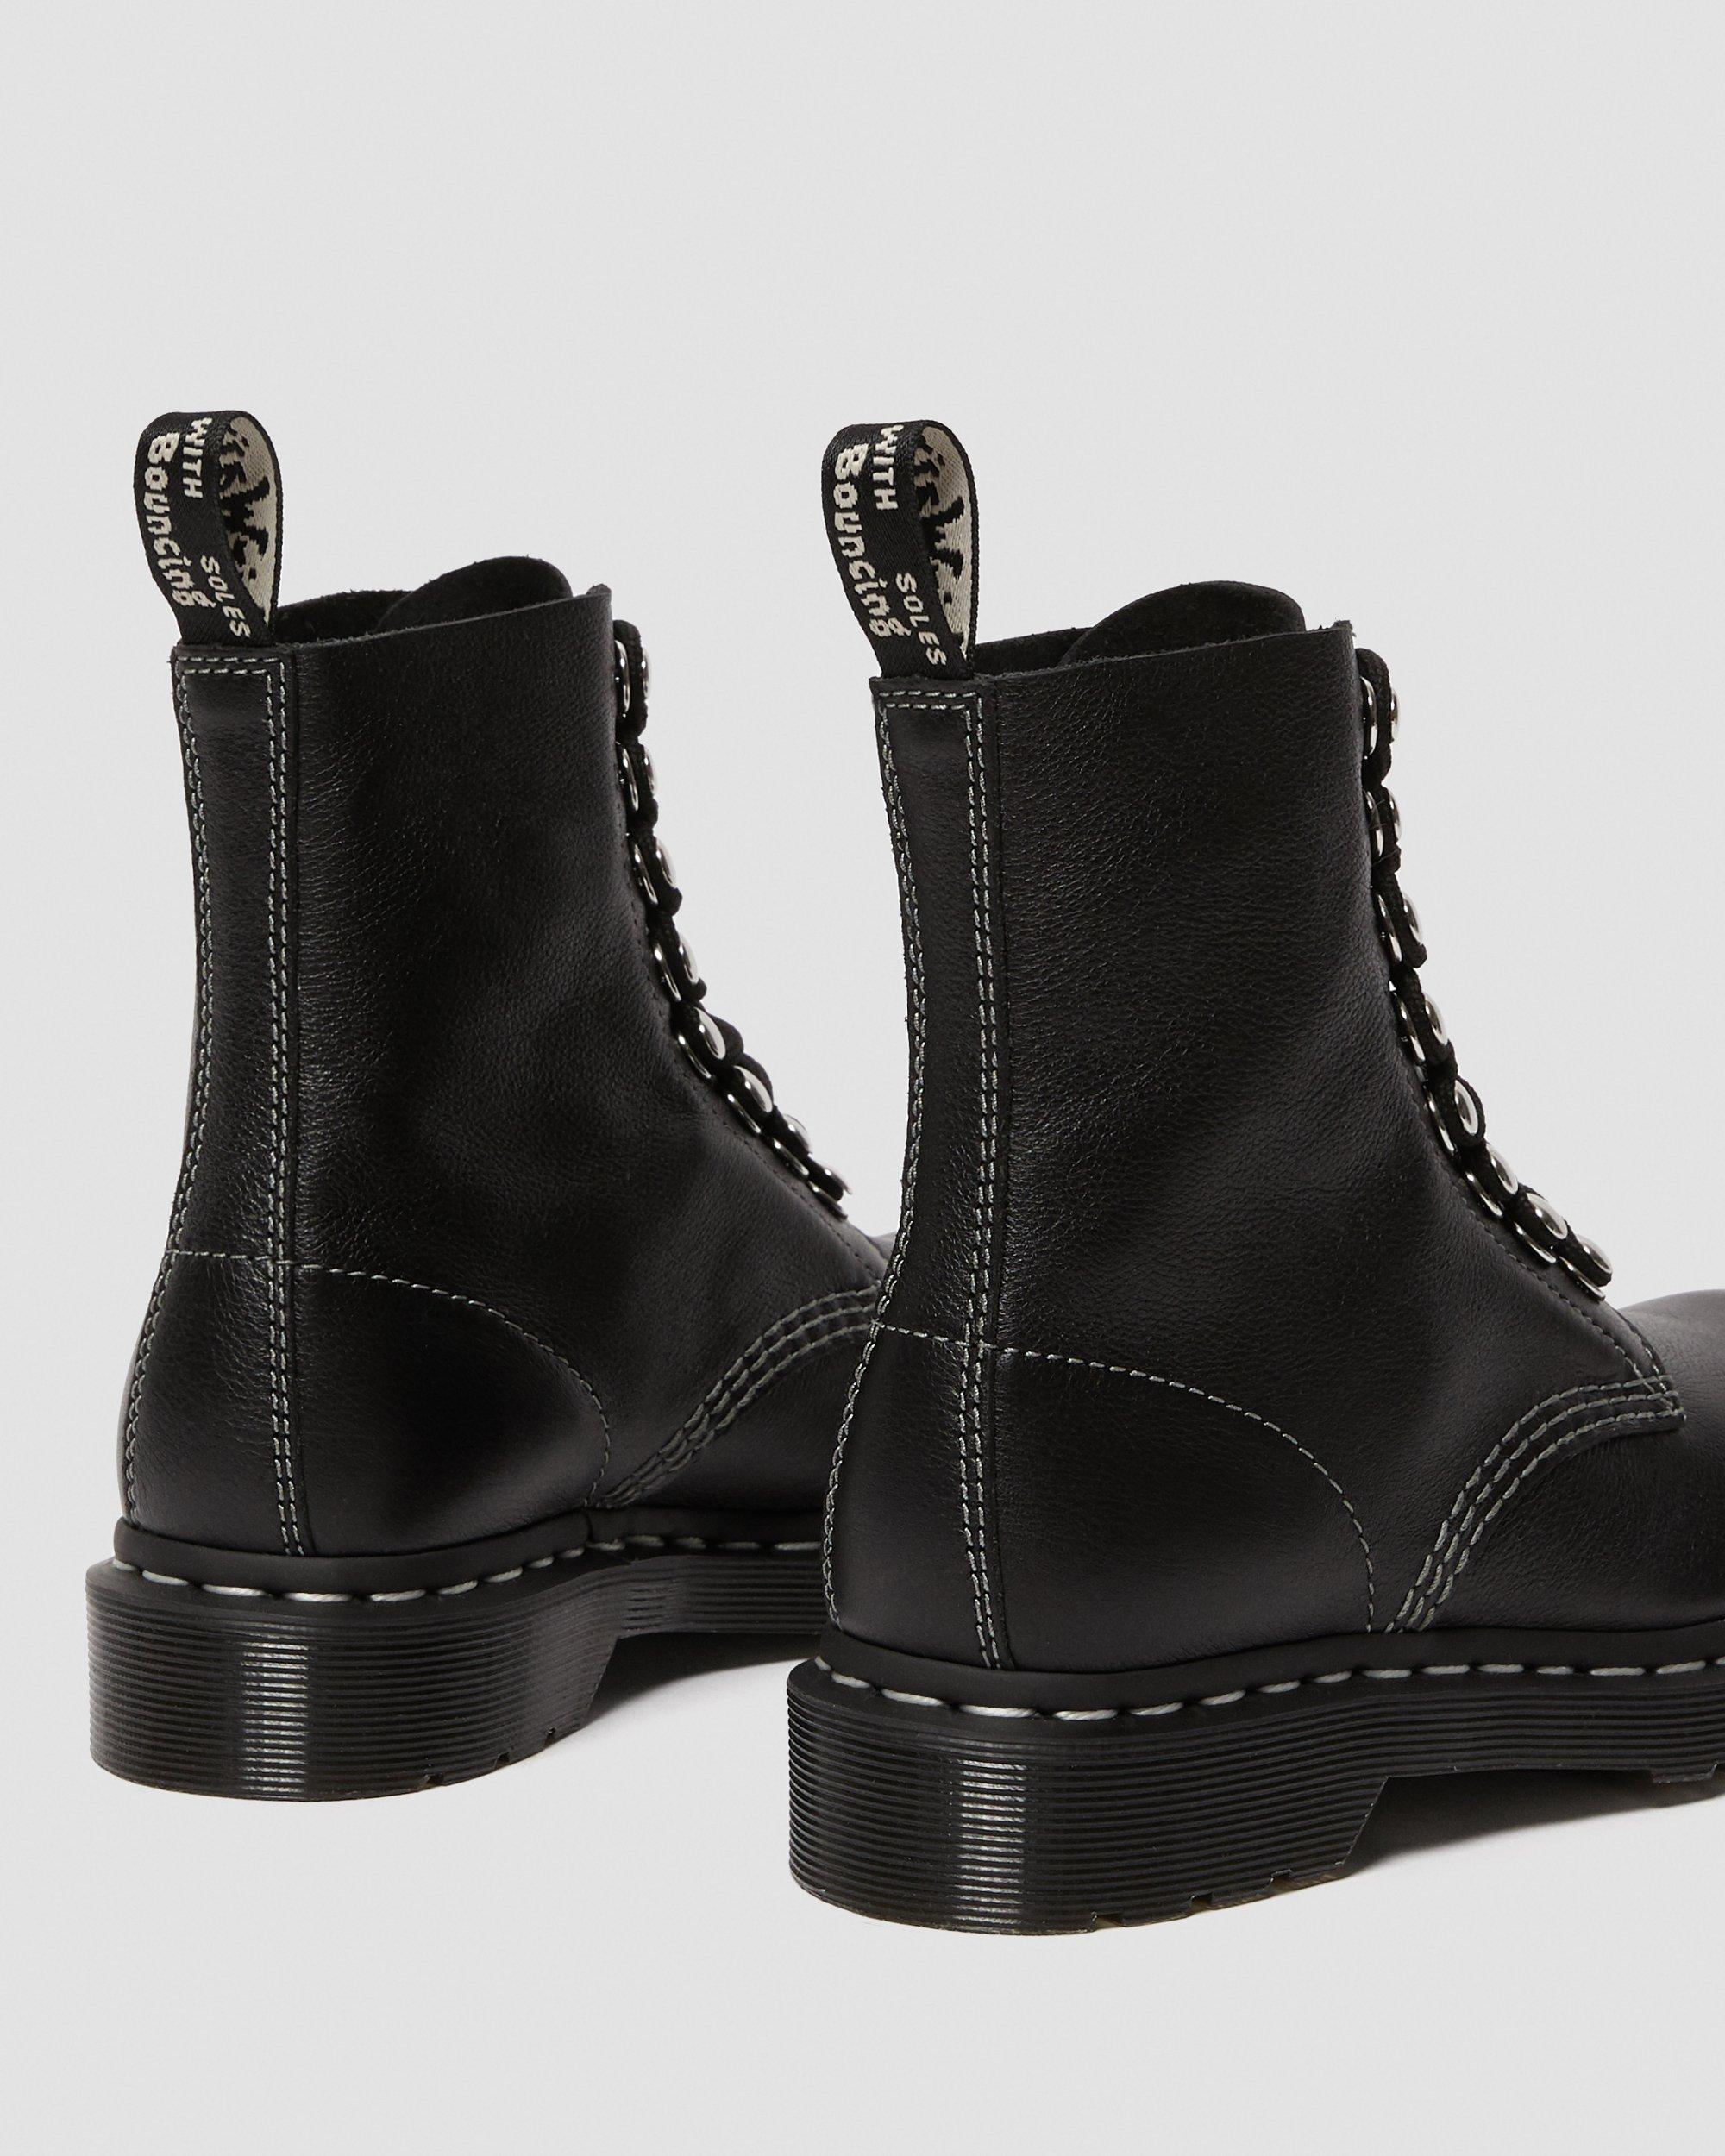 1460 PASCAL HARDWARE VIRGINIA LEATHER ANKLE BOOTS | Dr. Martens